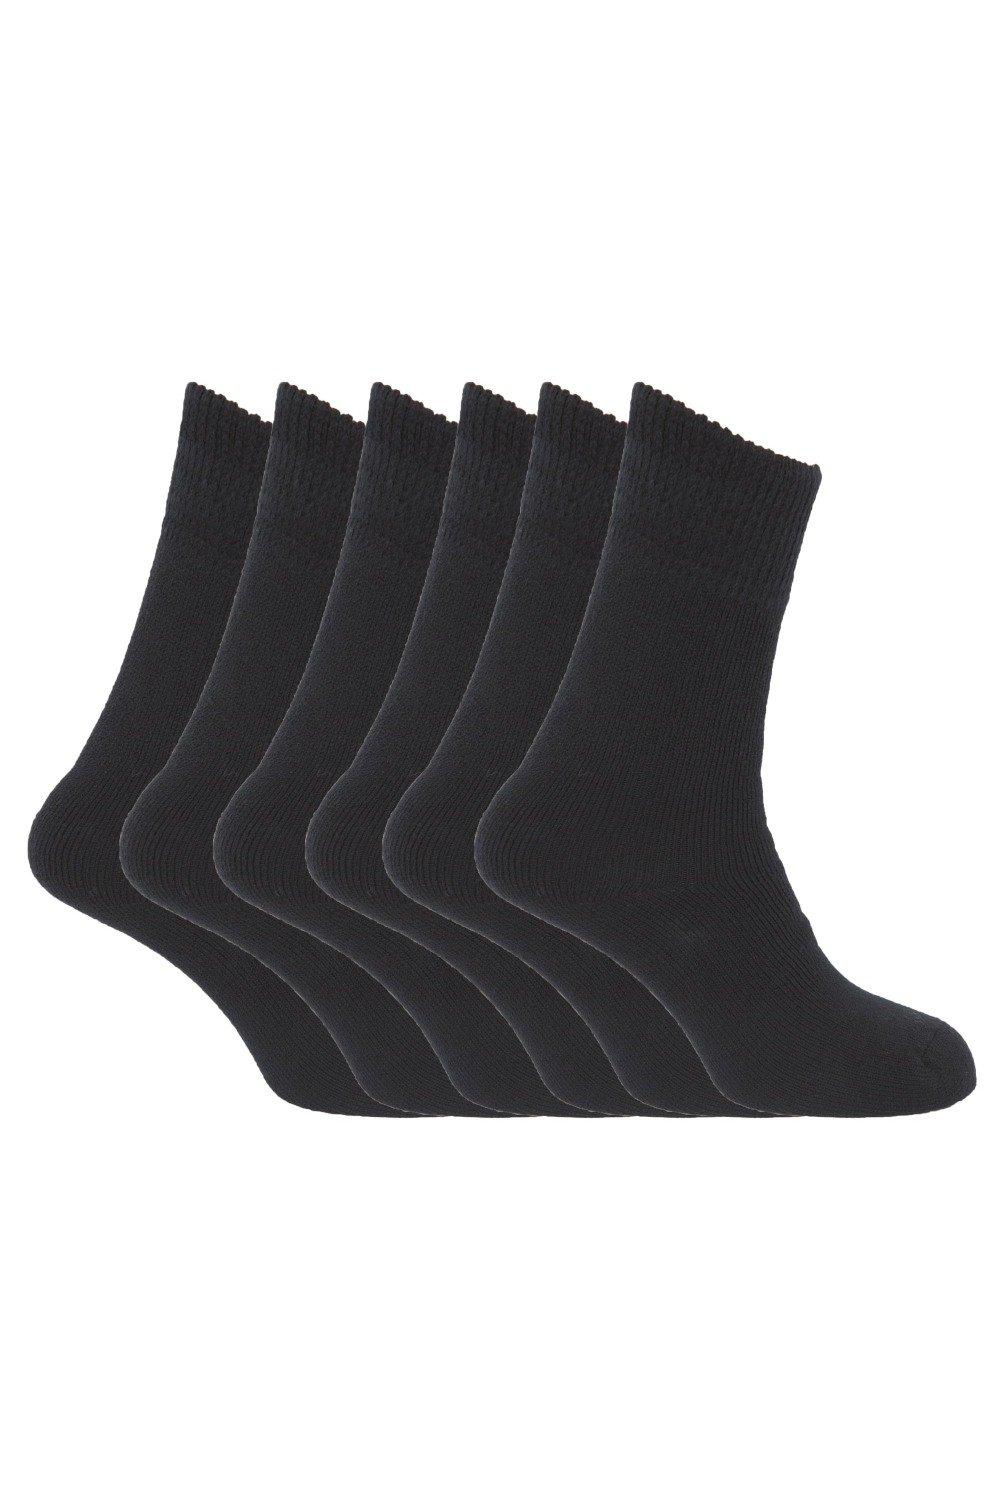 Premium Quality Multipack Thermal Socks, Double Brushed Inside (Pack Of 6)